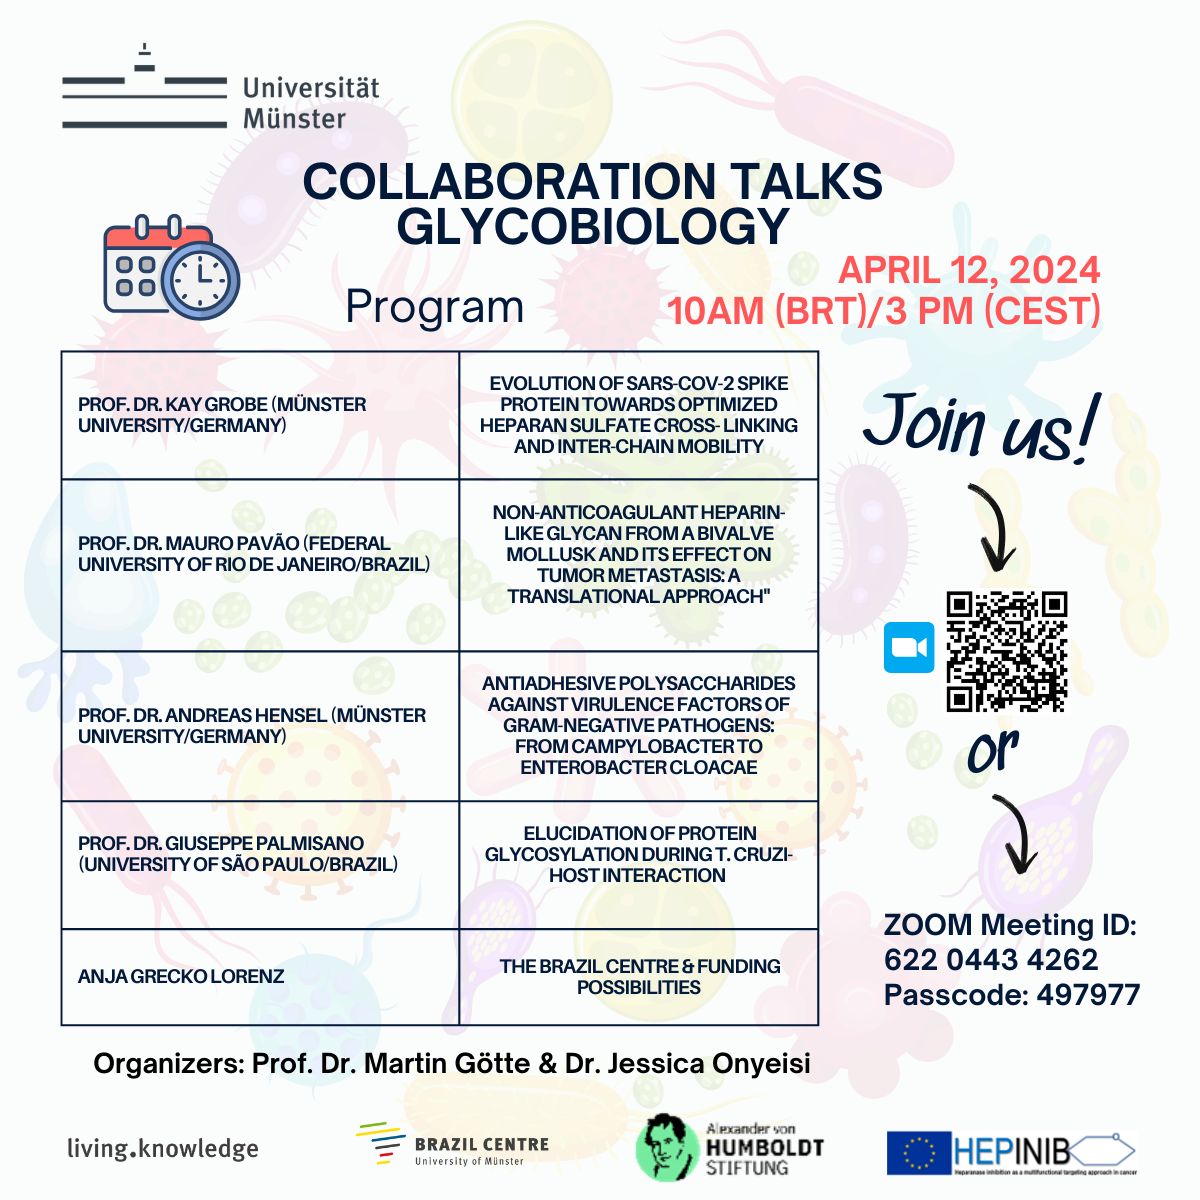 Join us for Collaboration Talks on Glycobiology on April 12, 2024, at 10am (BRT)/ 3pm (CEST). This free event is open to the public and supported by the Brazil Centre of the University of Münster. Don't miss out! #Glycobiology #CollaborationTalks